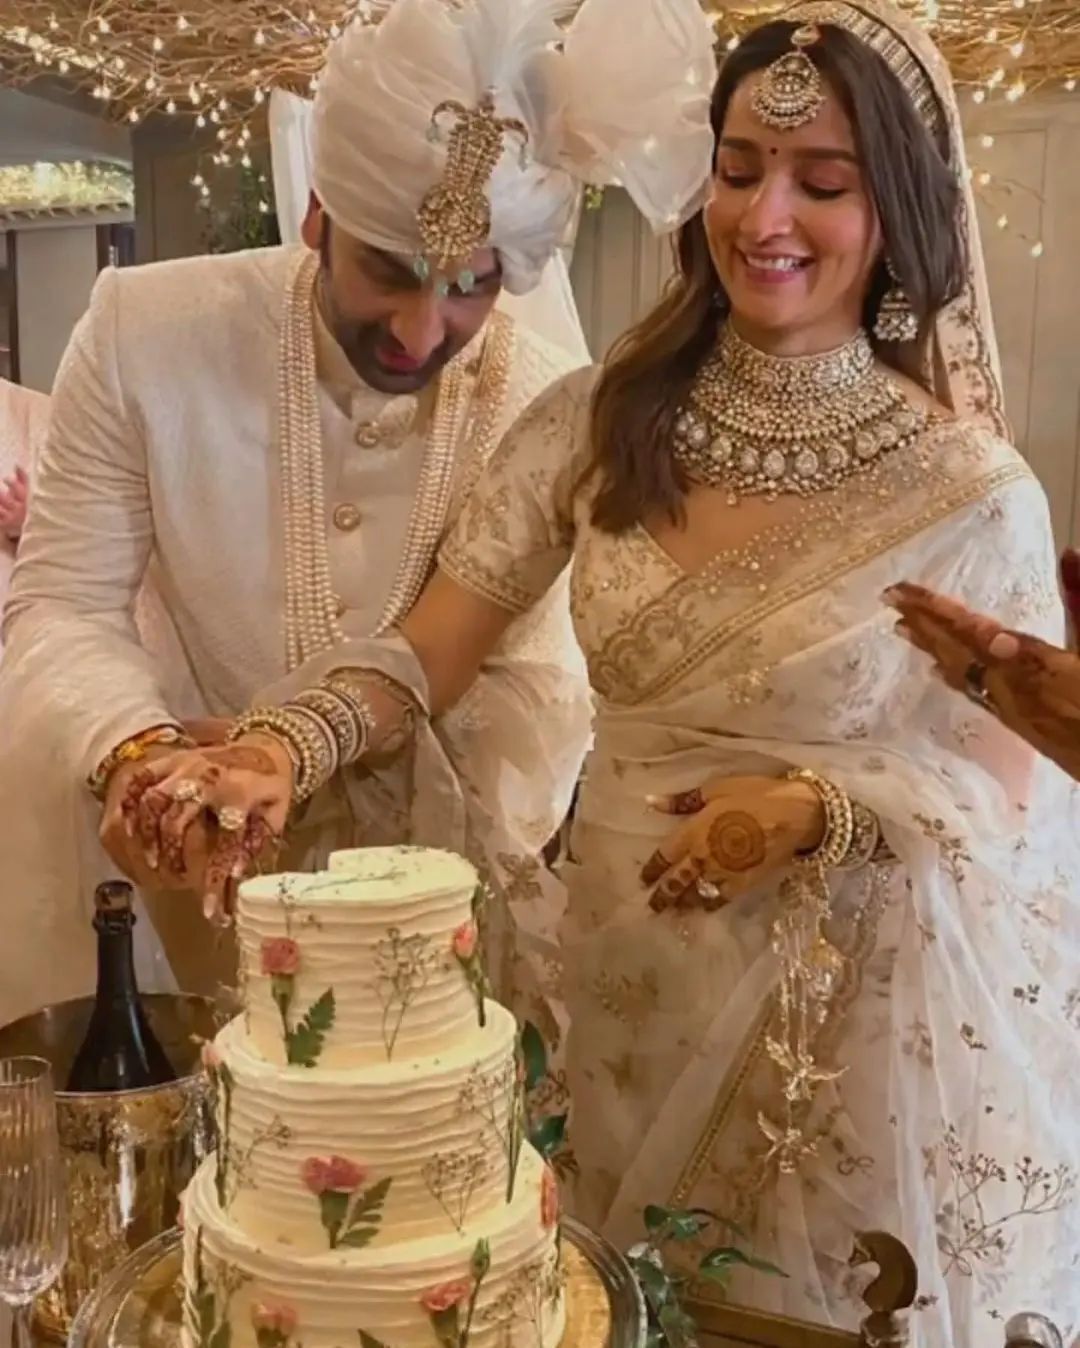 Ranbir-Alia Wedding: Here Are Some Inside Pictures From The Couple’s Dreamy Wedding